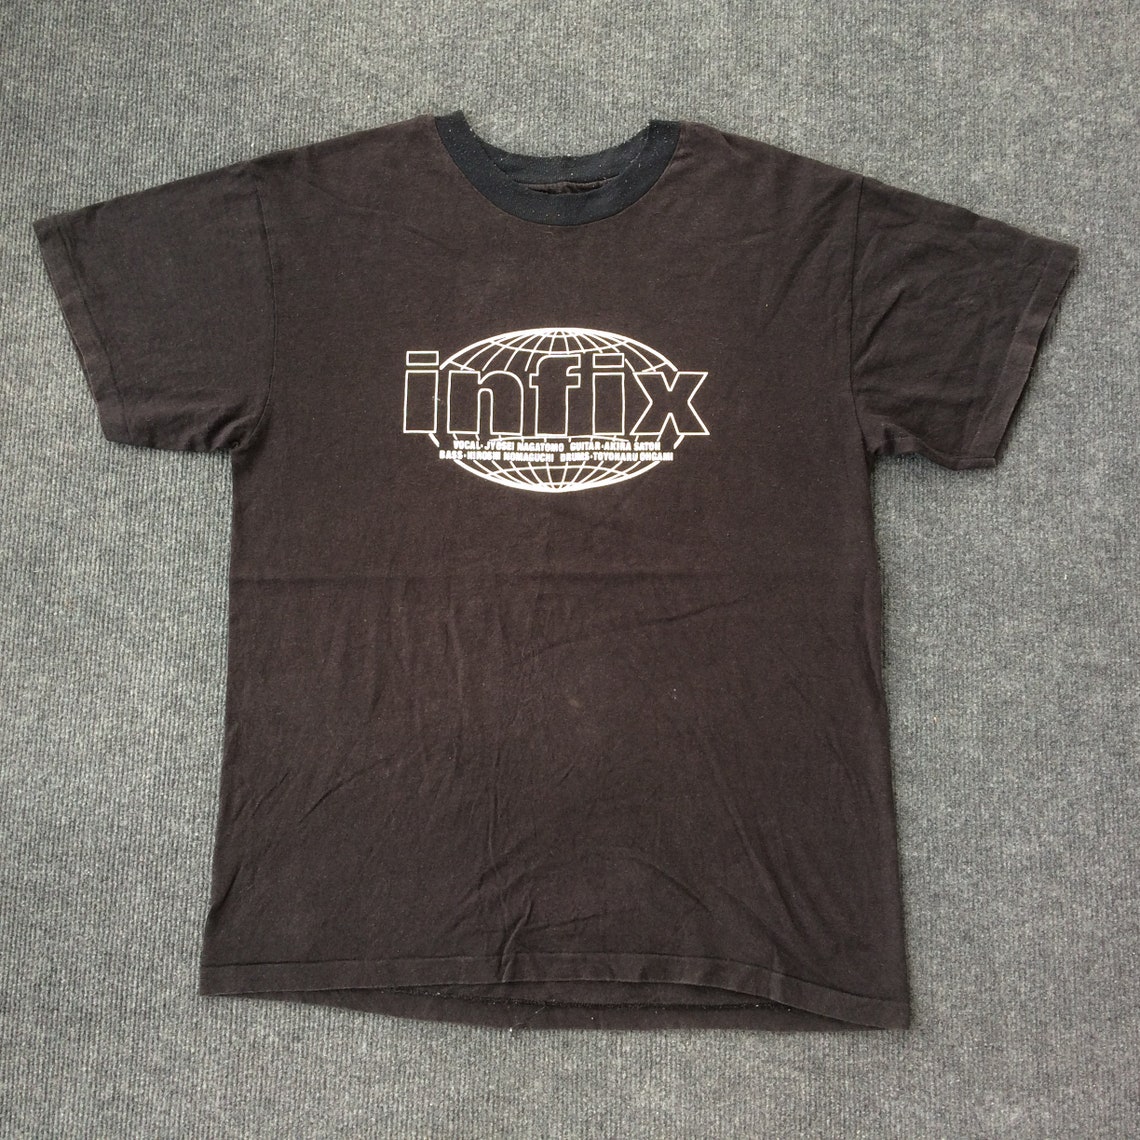 Vintage Infix Japanese Band Musical Group Tour 90s Rare T | Etsy